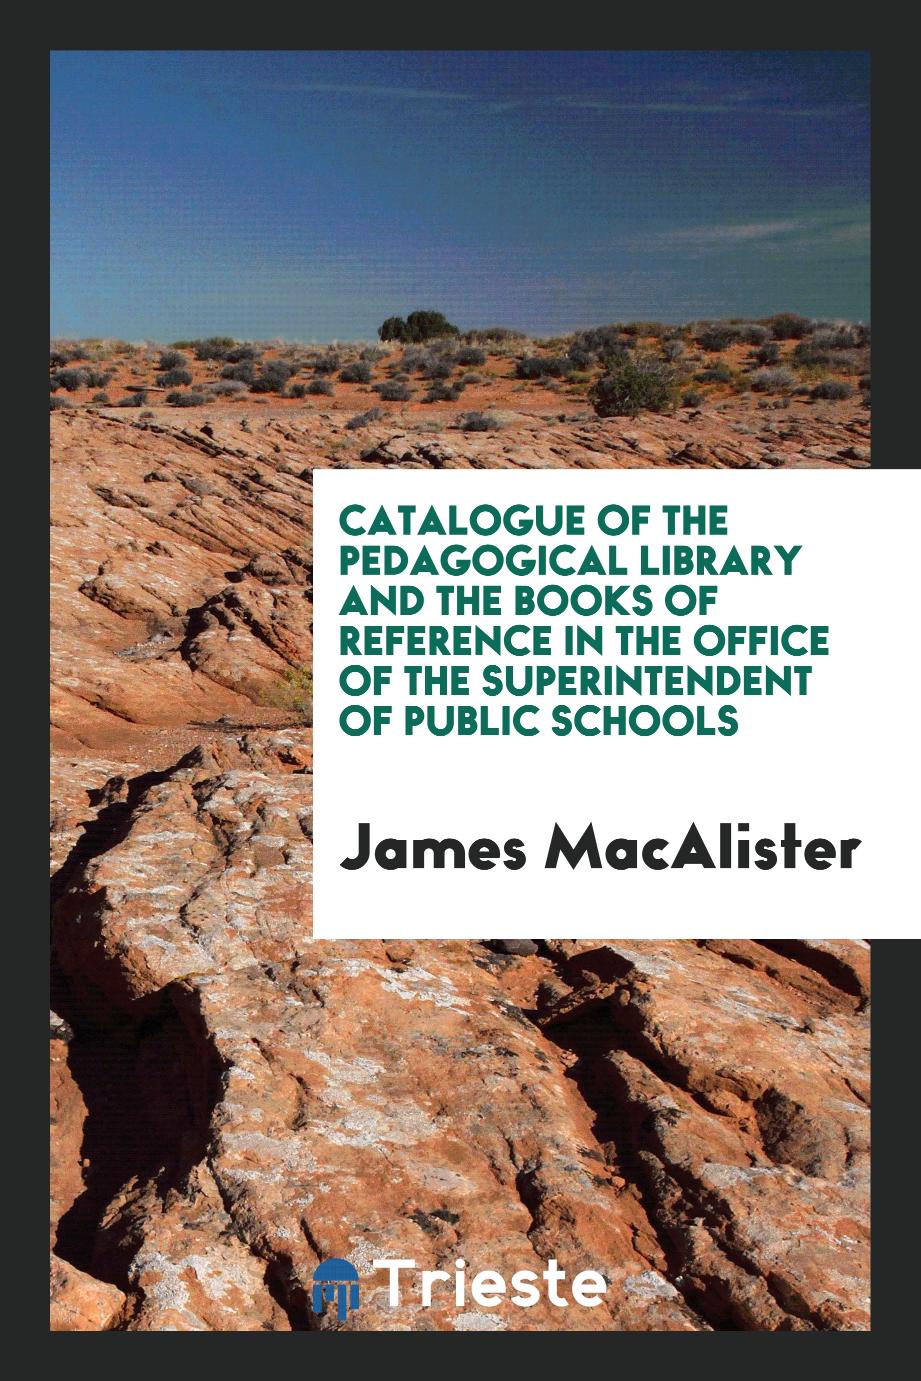 James MacAlister - Catalogue of the Pedagogical Library and the Books of Reference in the Office of the Superintendent of Public Schools